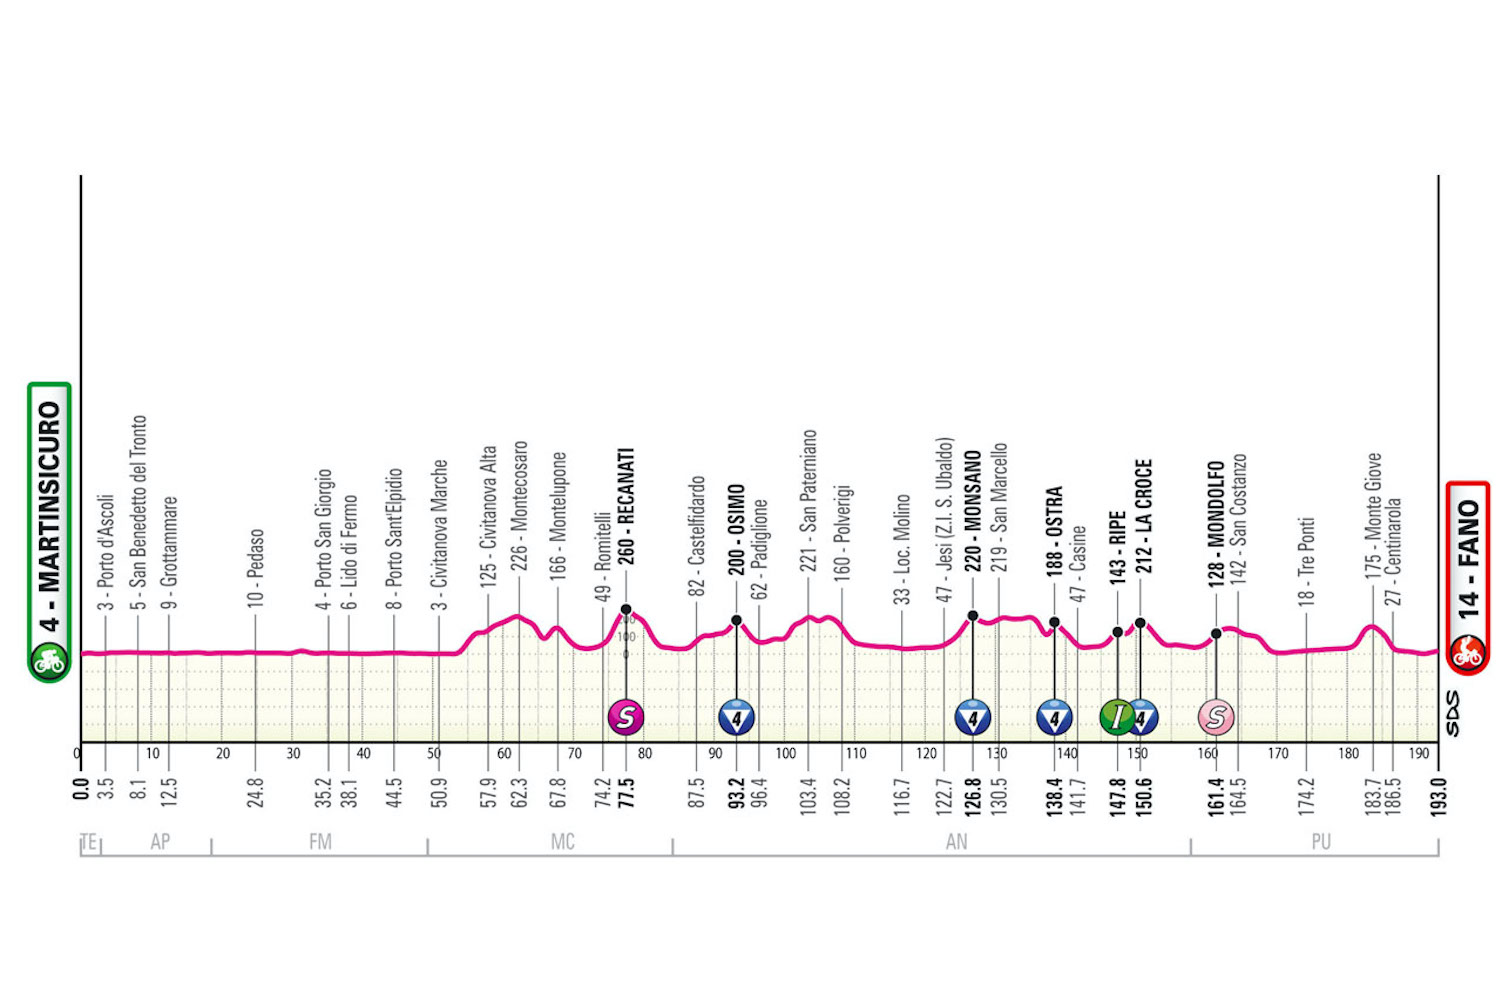 The profile of stage 12 of the Giro d'Italia.